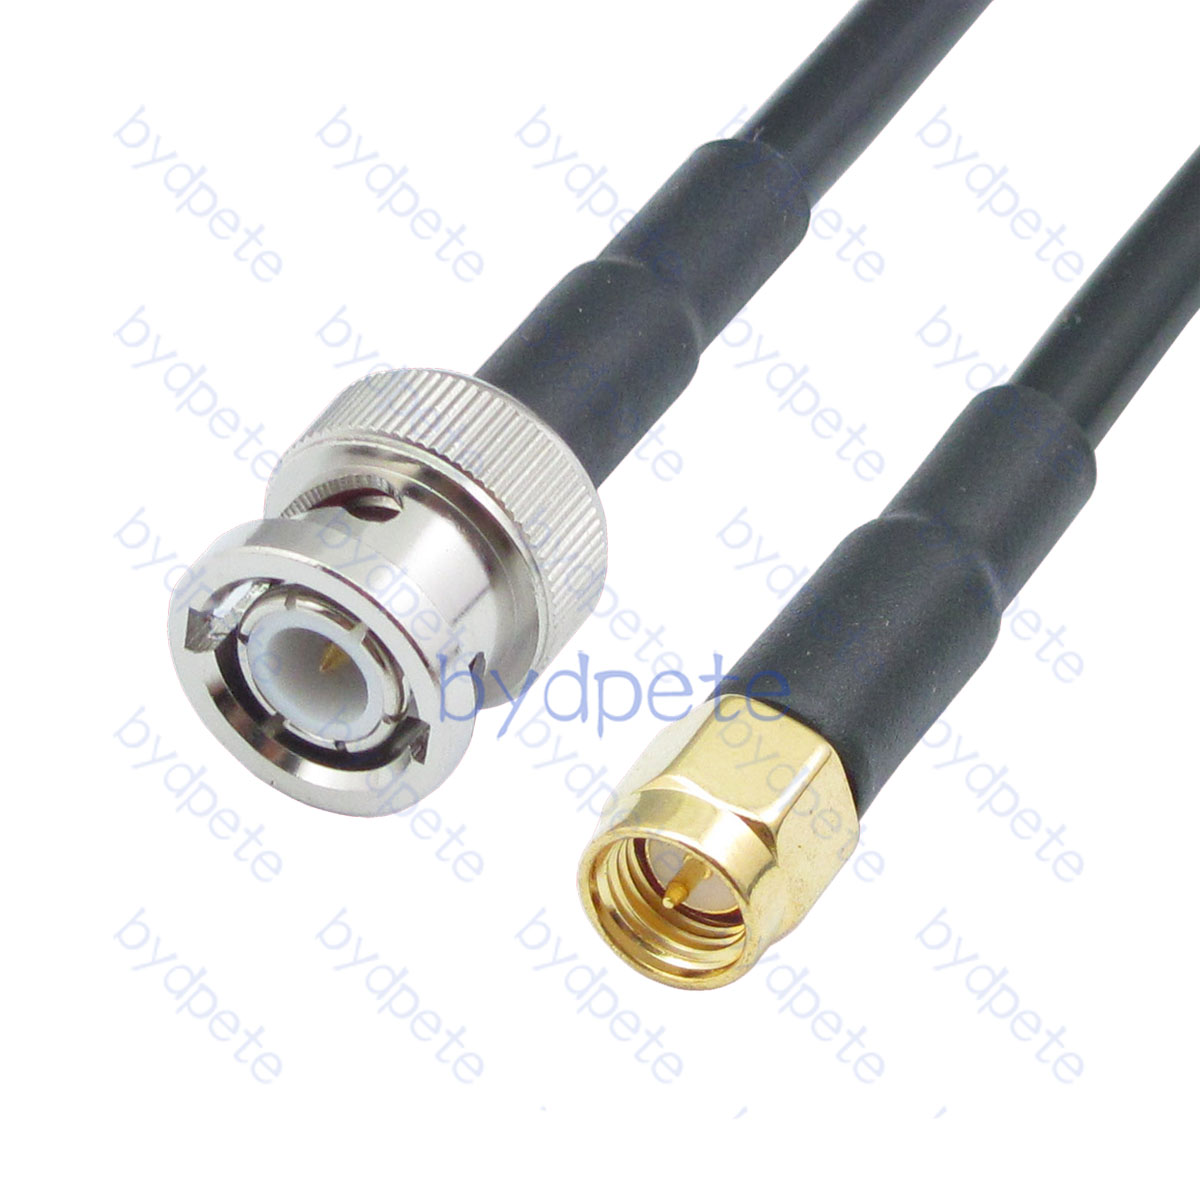 BNC male plug to SMA male plug RF Pigtail Caoxial Jumper Cable RG58 bydpete BYDC061BNC58